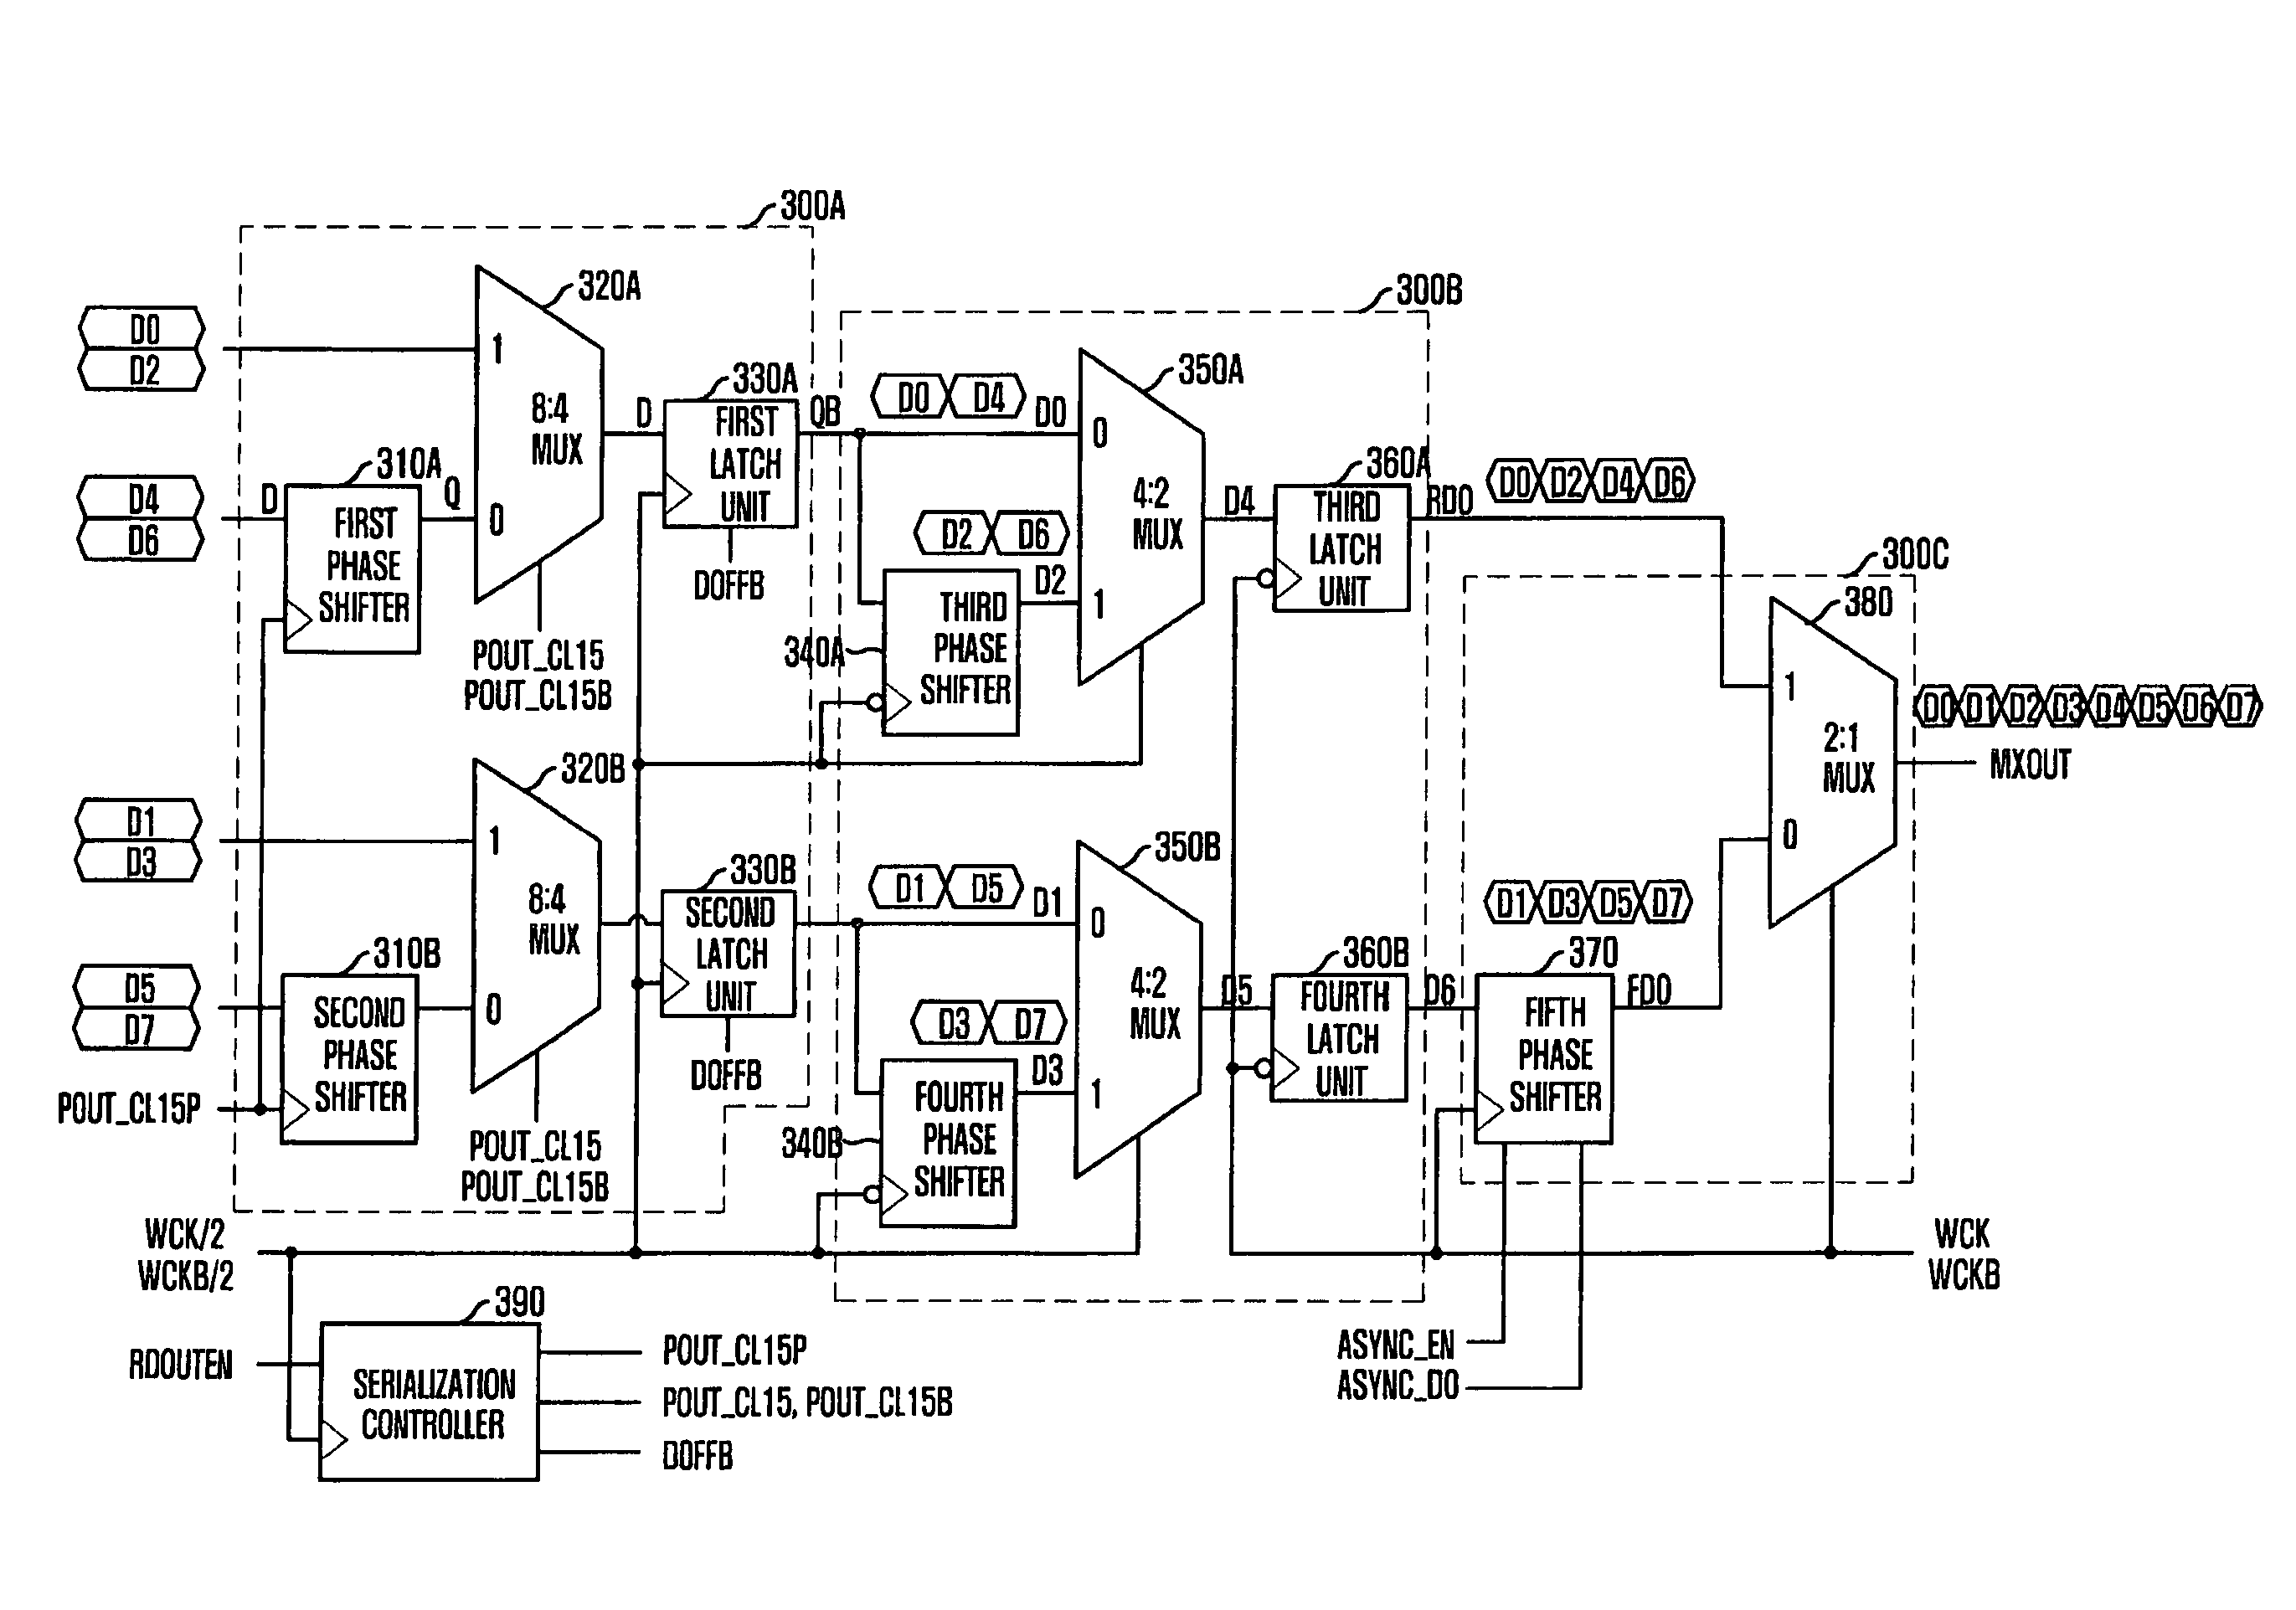 Semiconductor memory device for high-speed data input/output